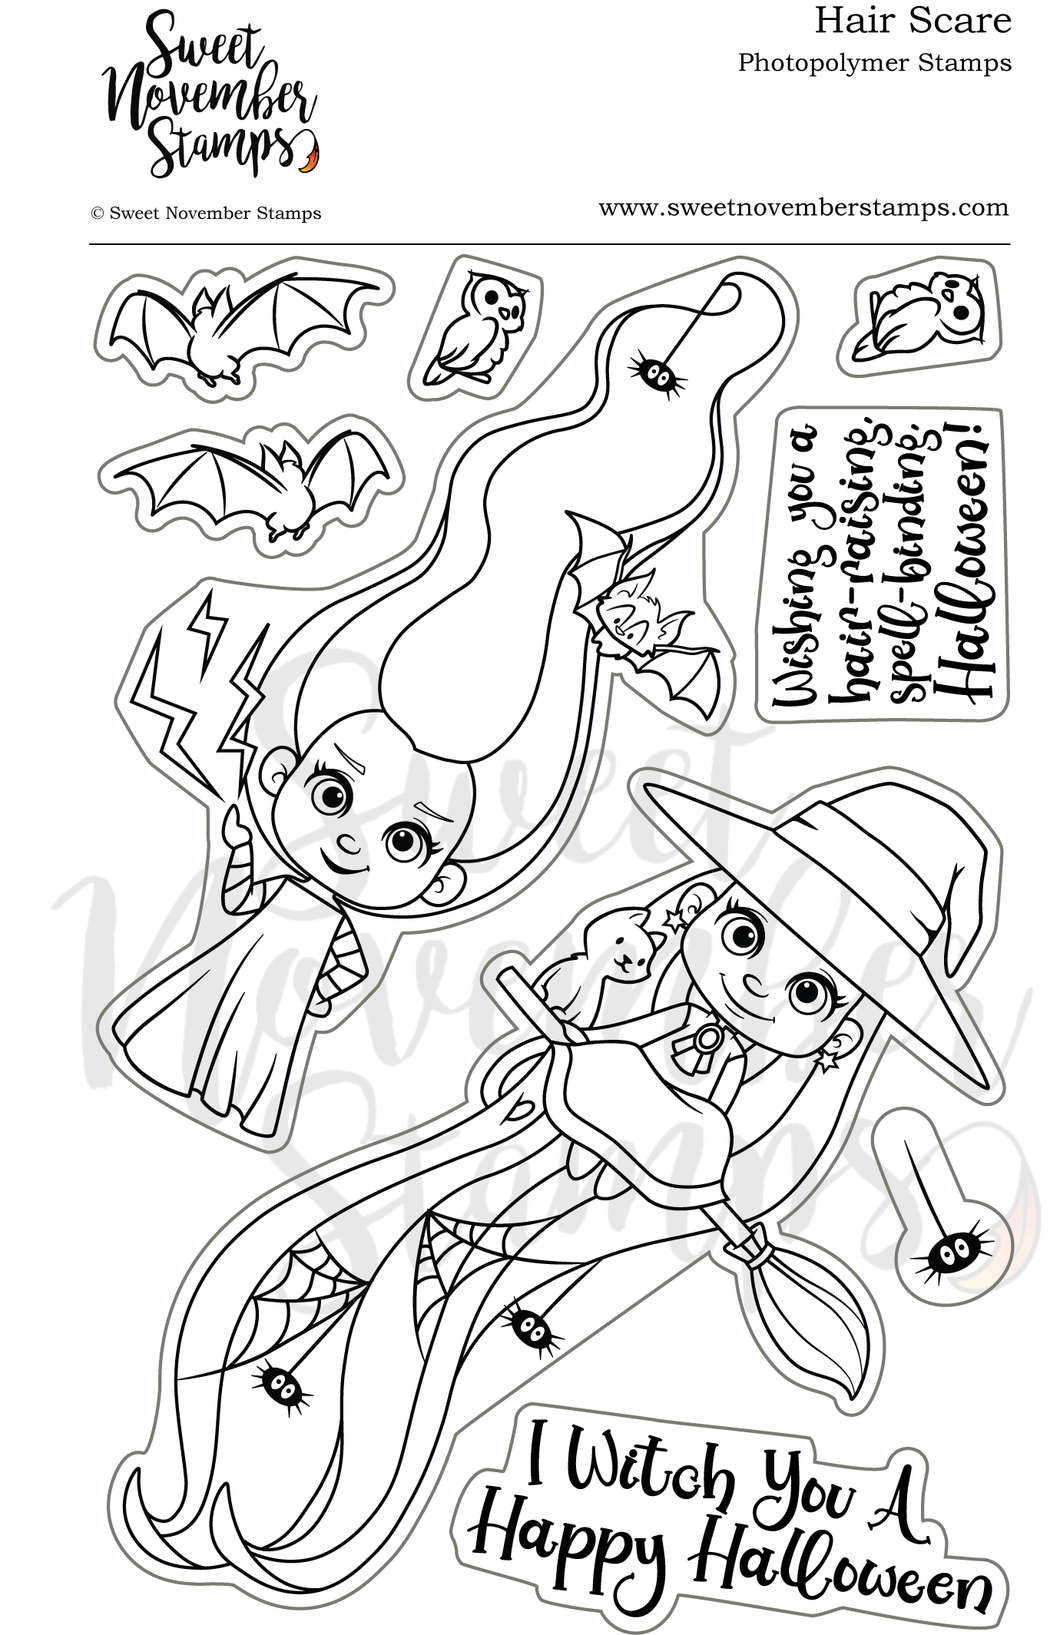 Clear Stamp Set - Hair Scare